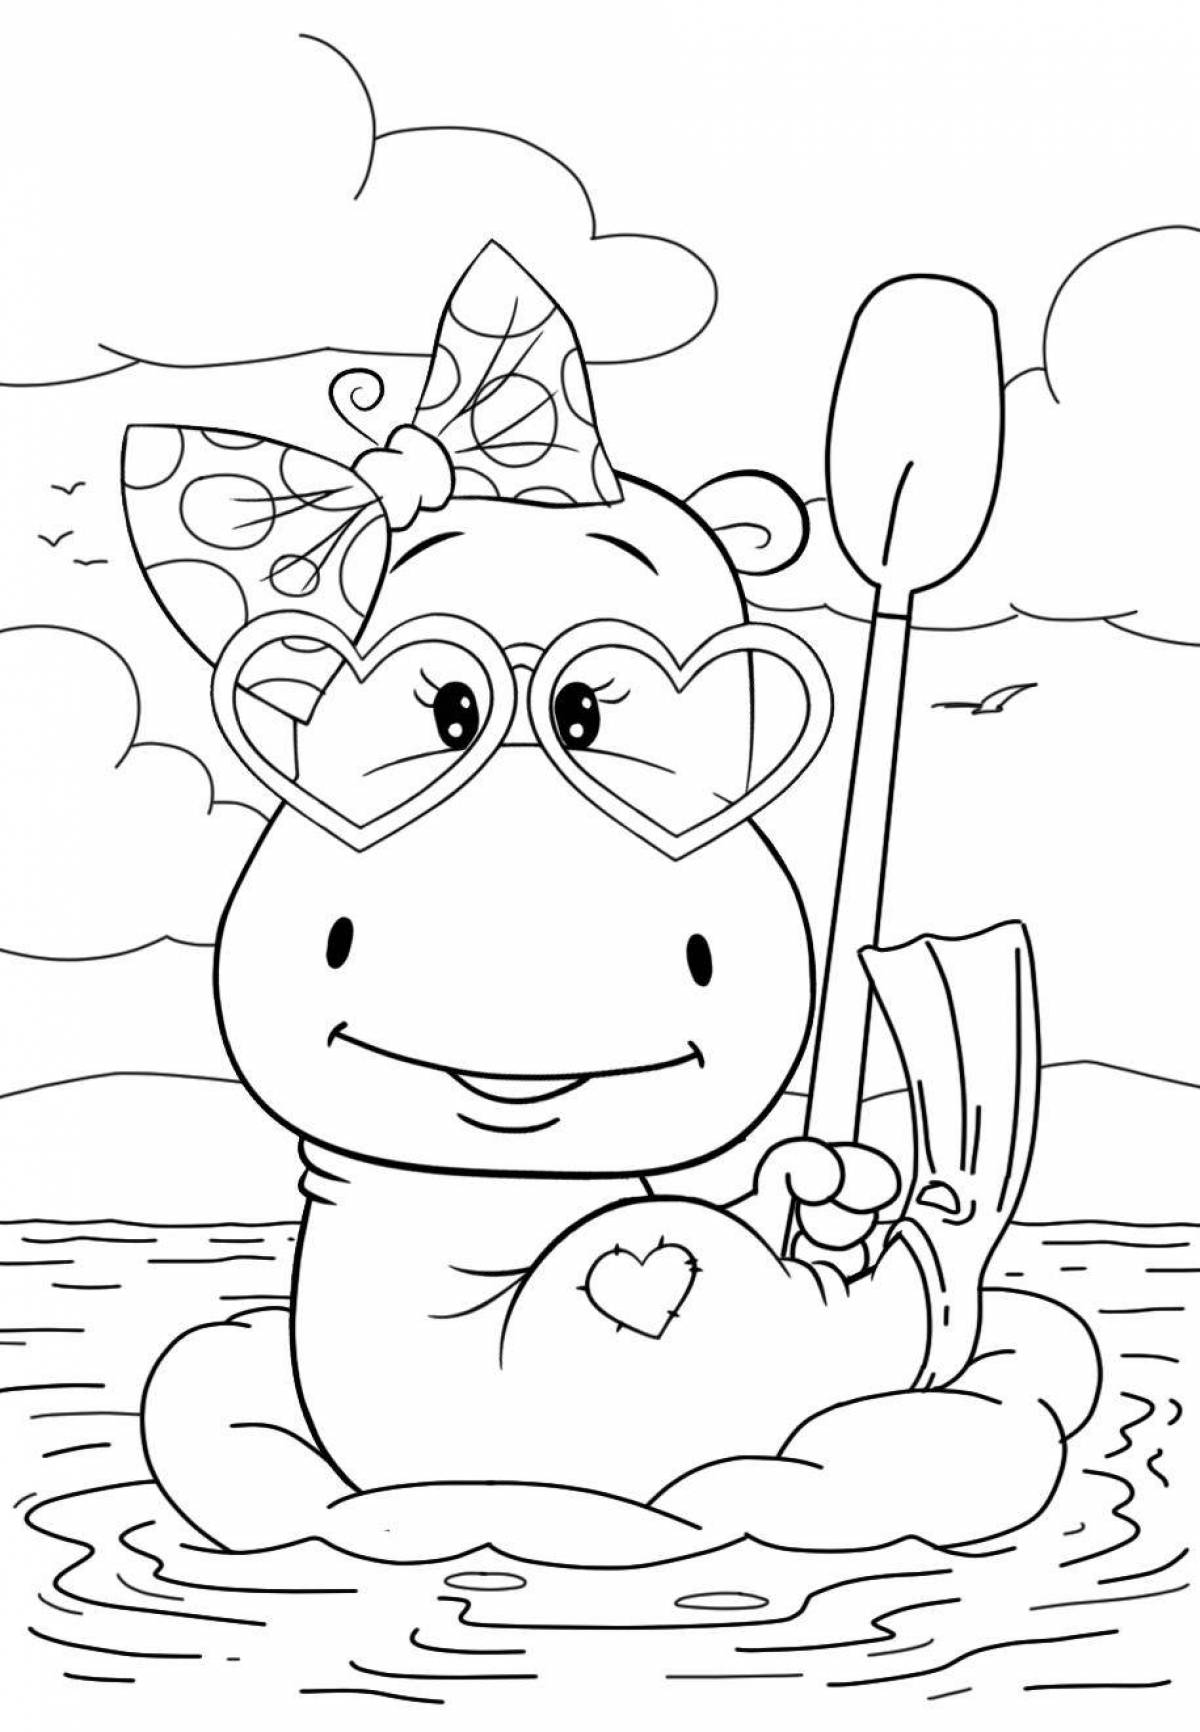 Attractive hippo coloring page